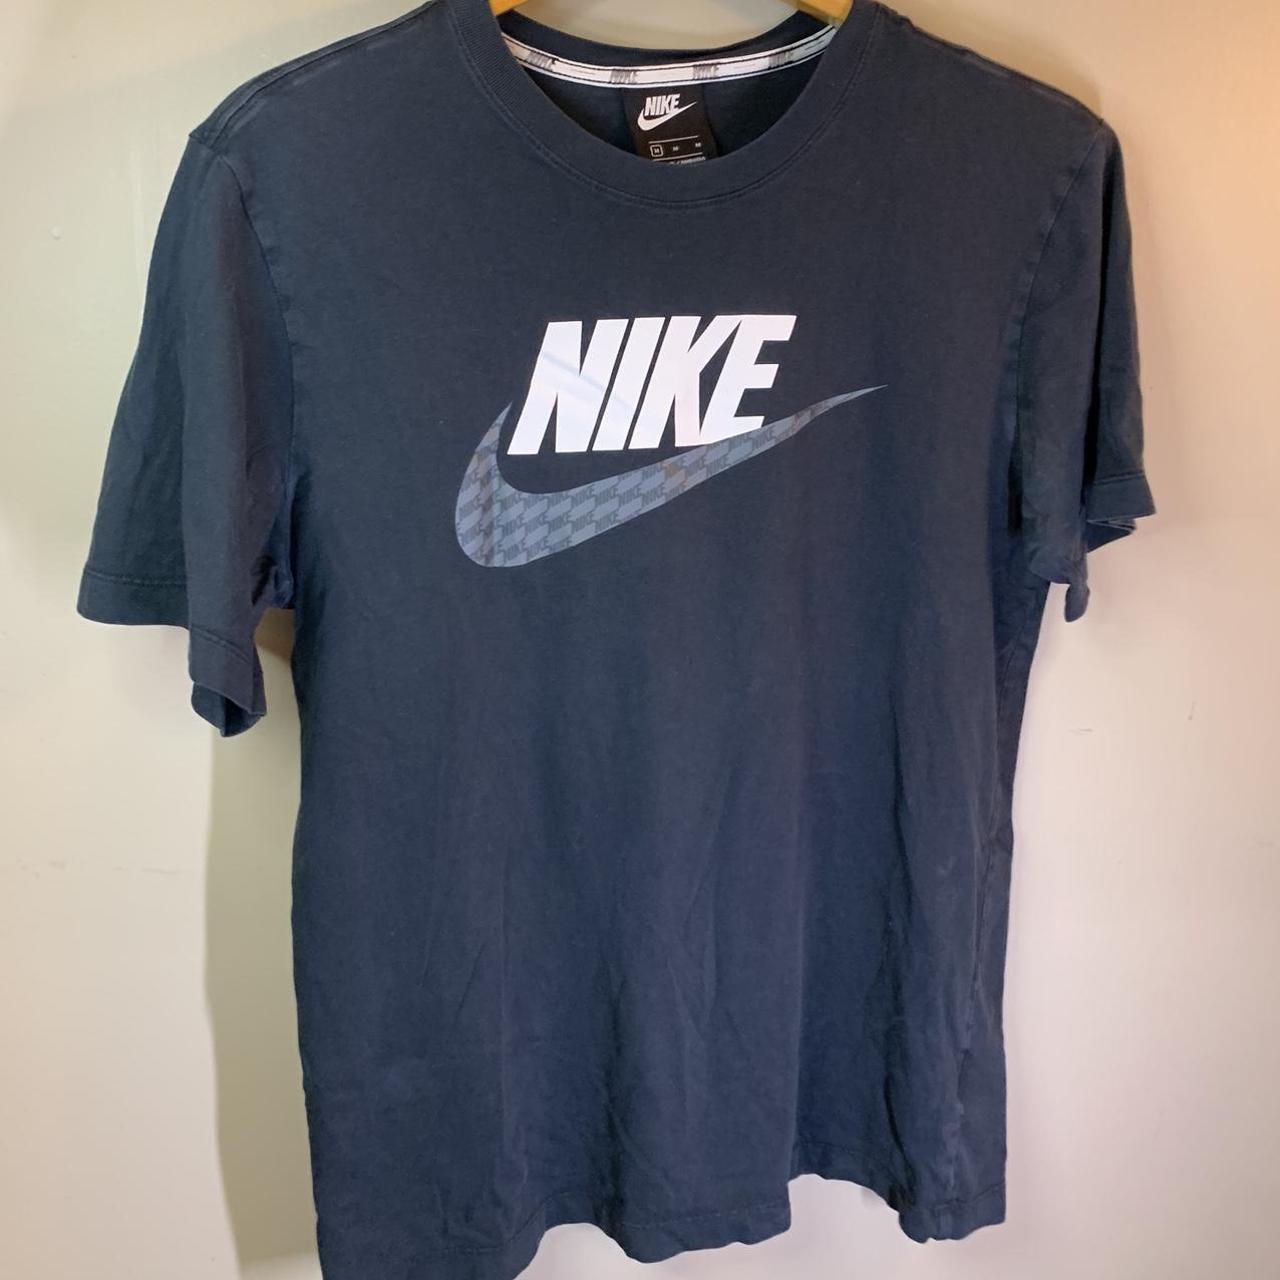 Y2K Nike Made in Cambodia Good Tag Length- 26 ... - Depop